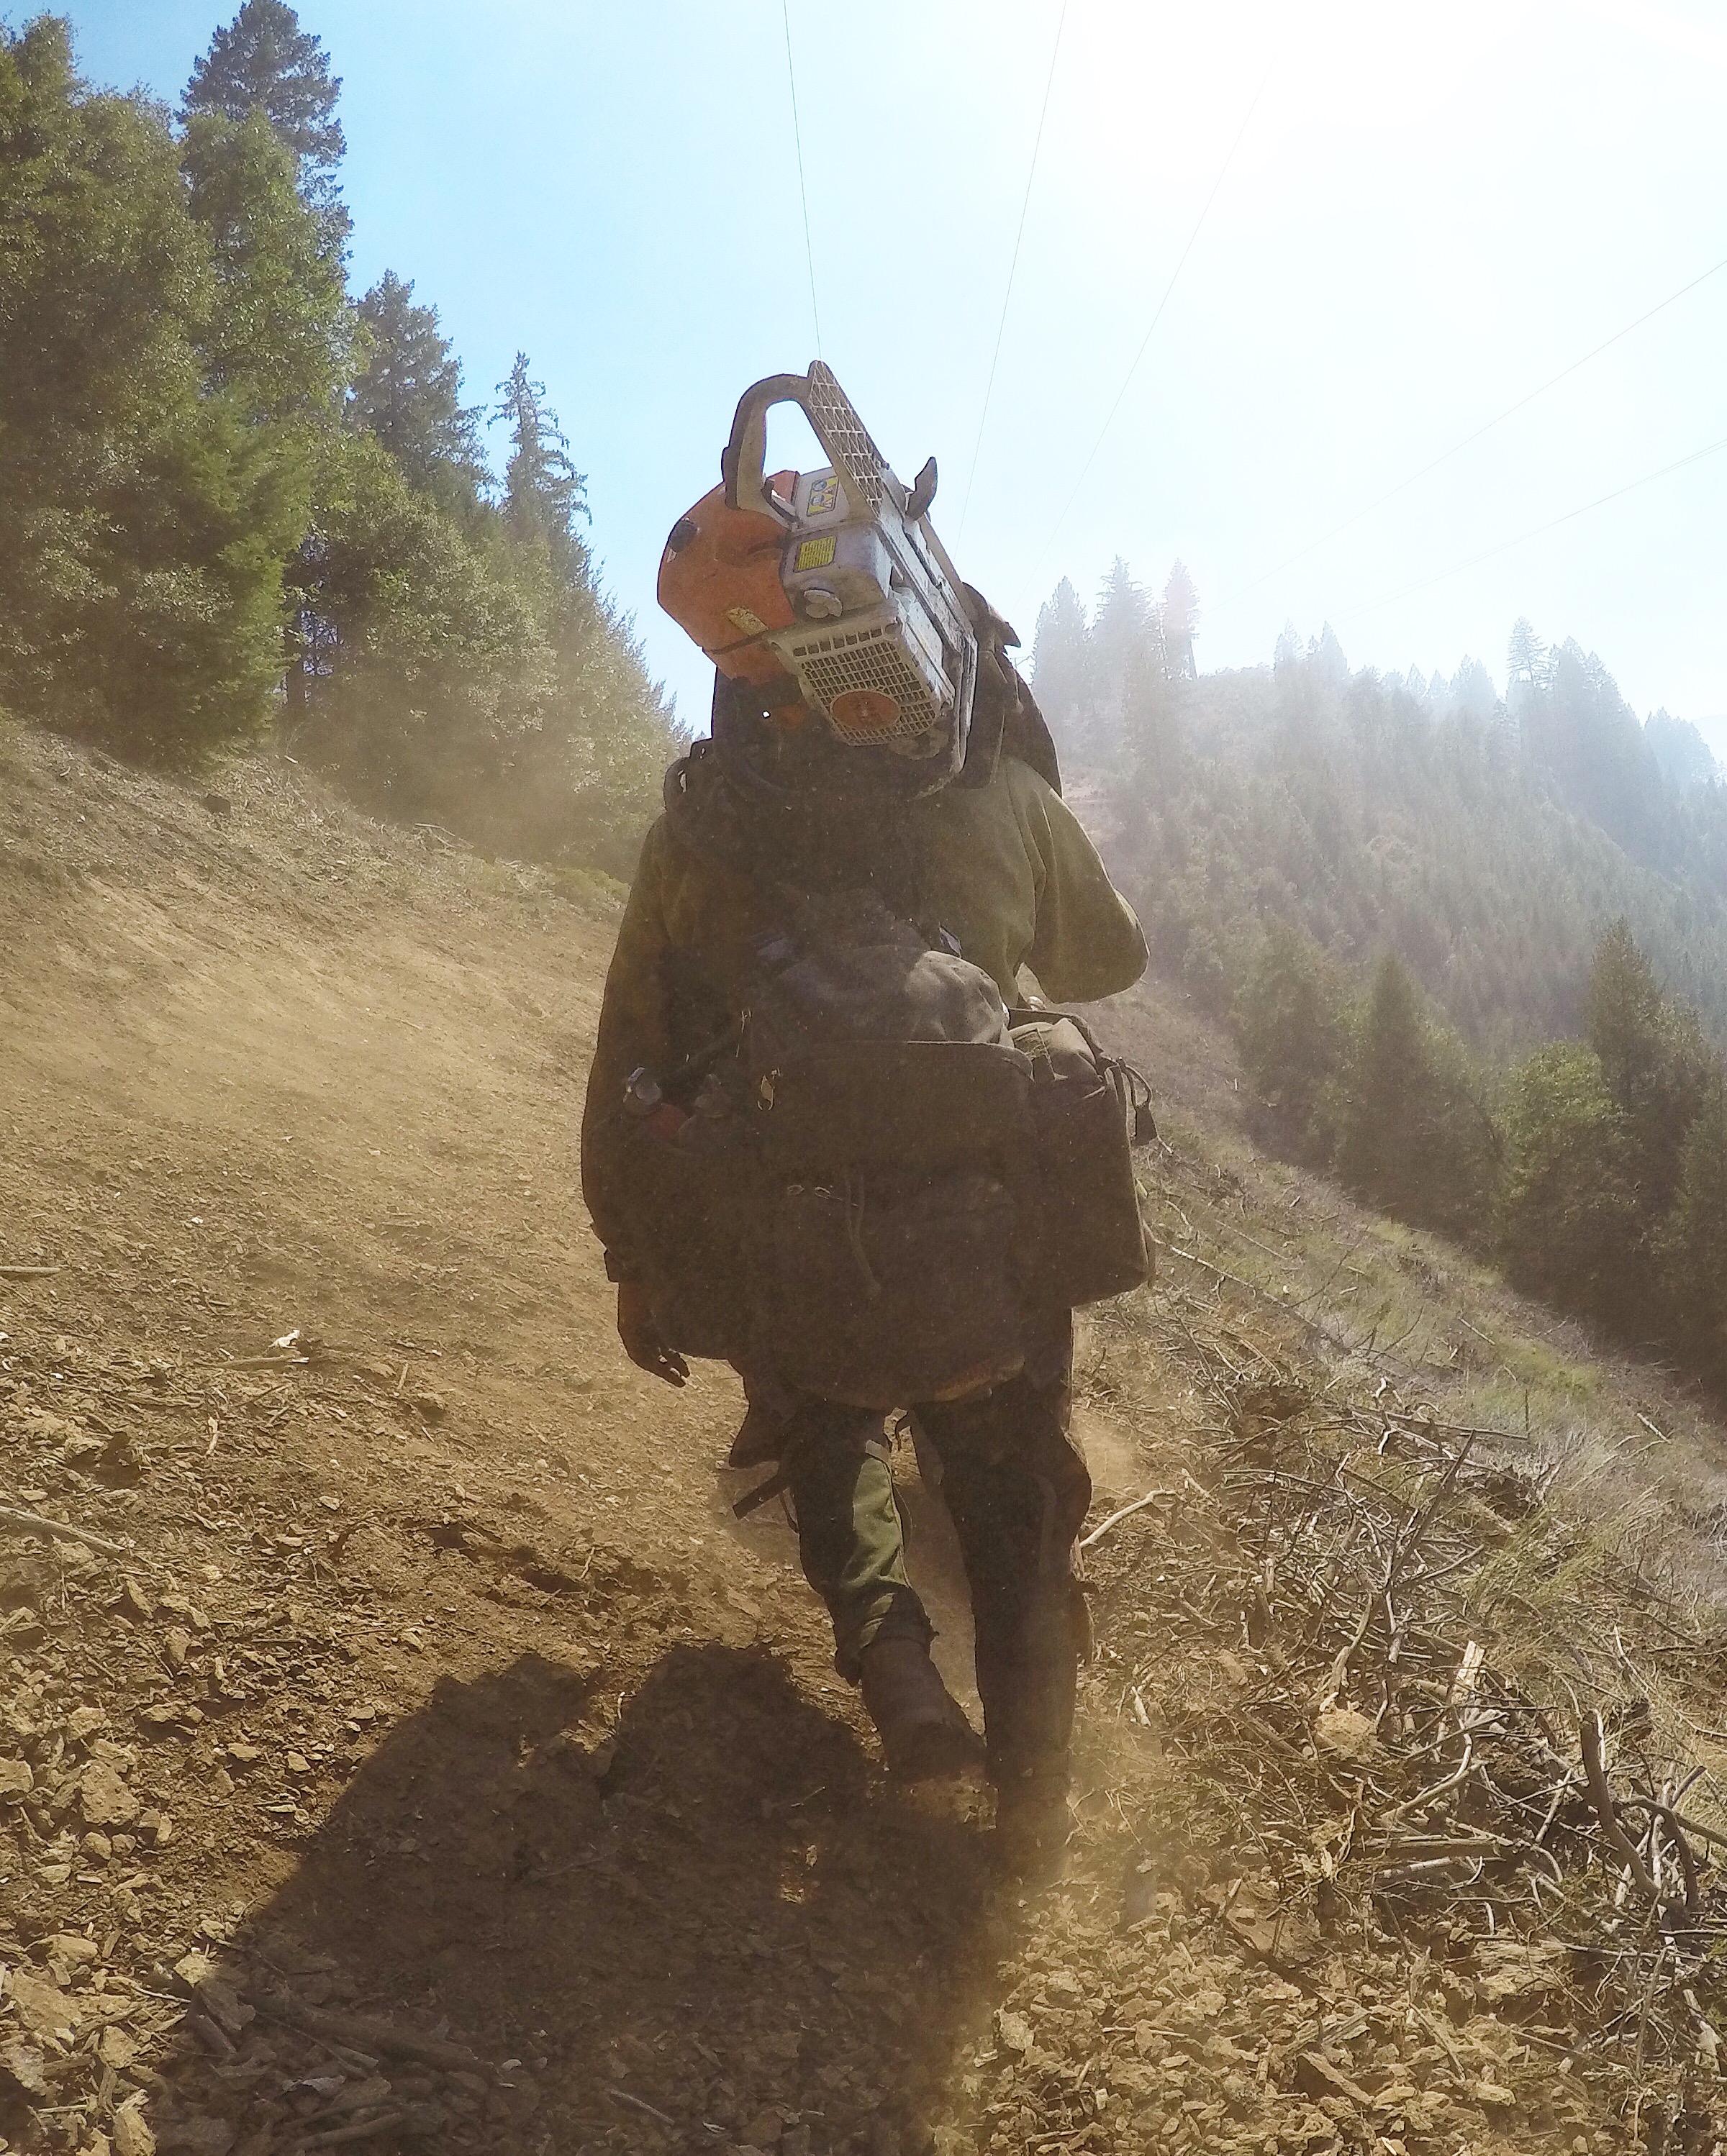 Wildland firefighter carrying chainsaw from taken by ExpertVoice Expert Gregg Boydston